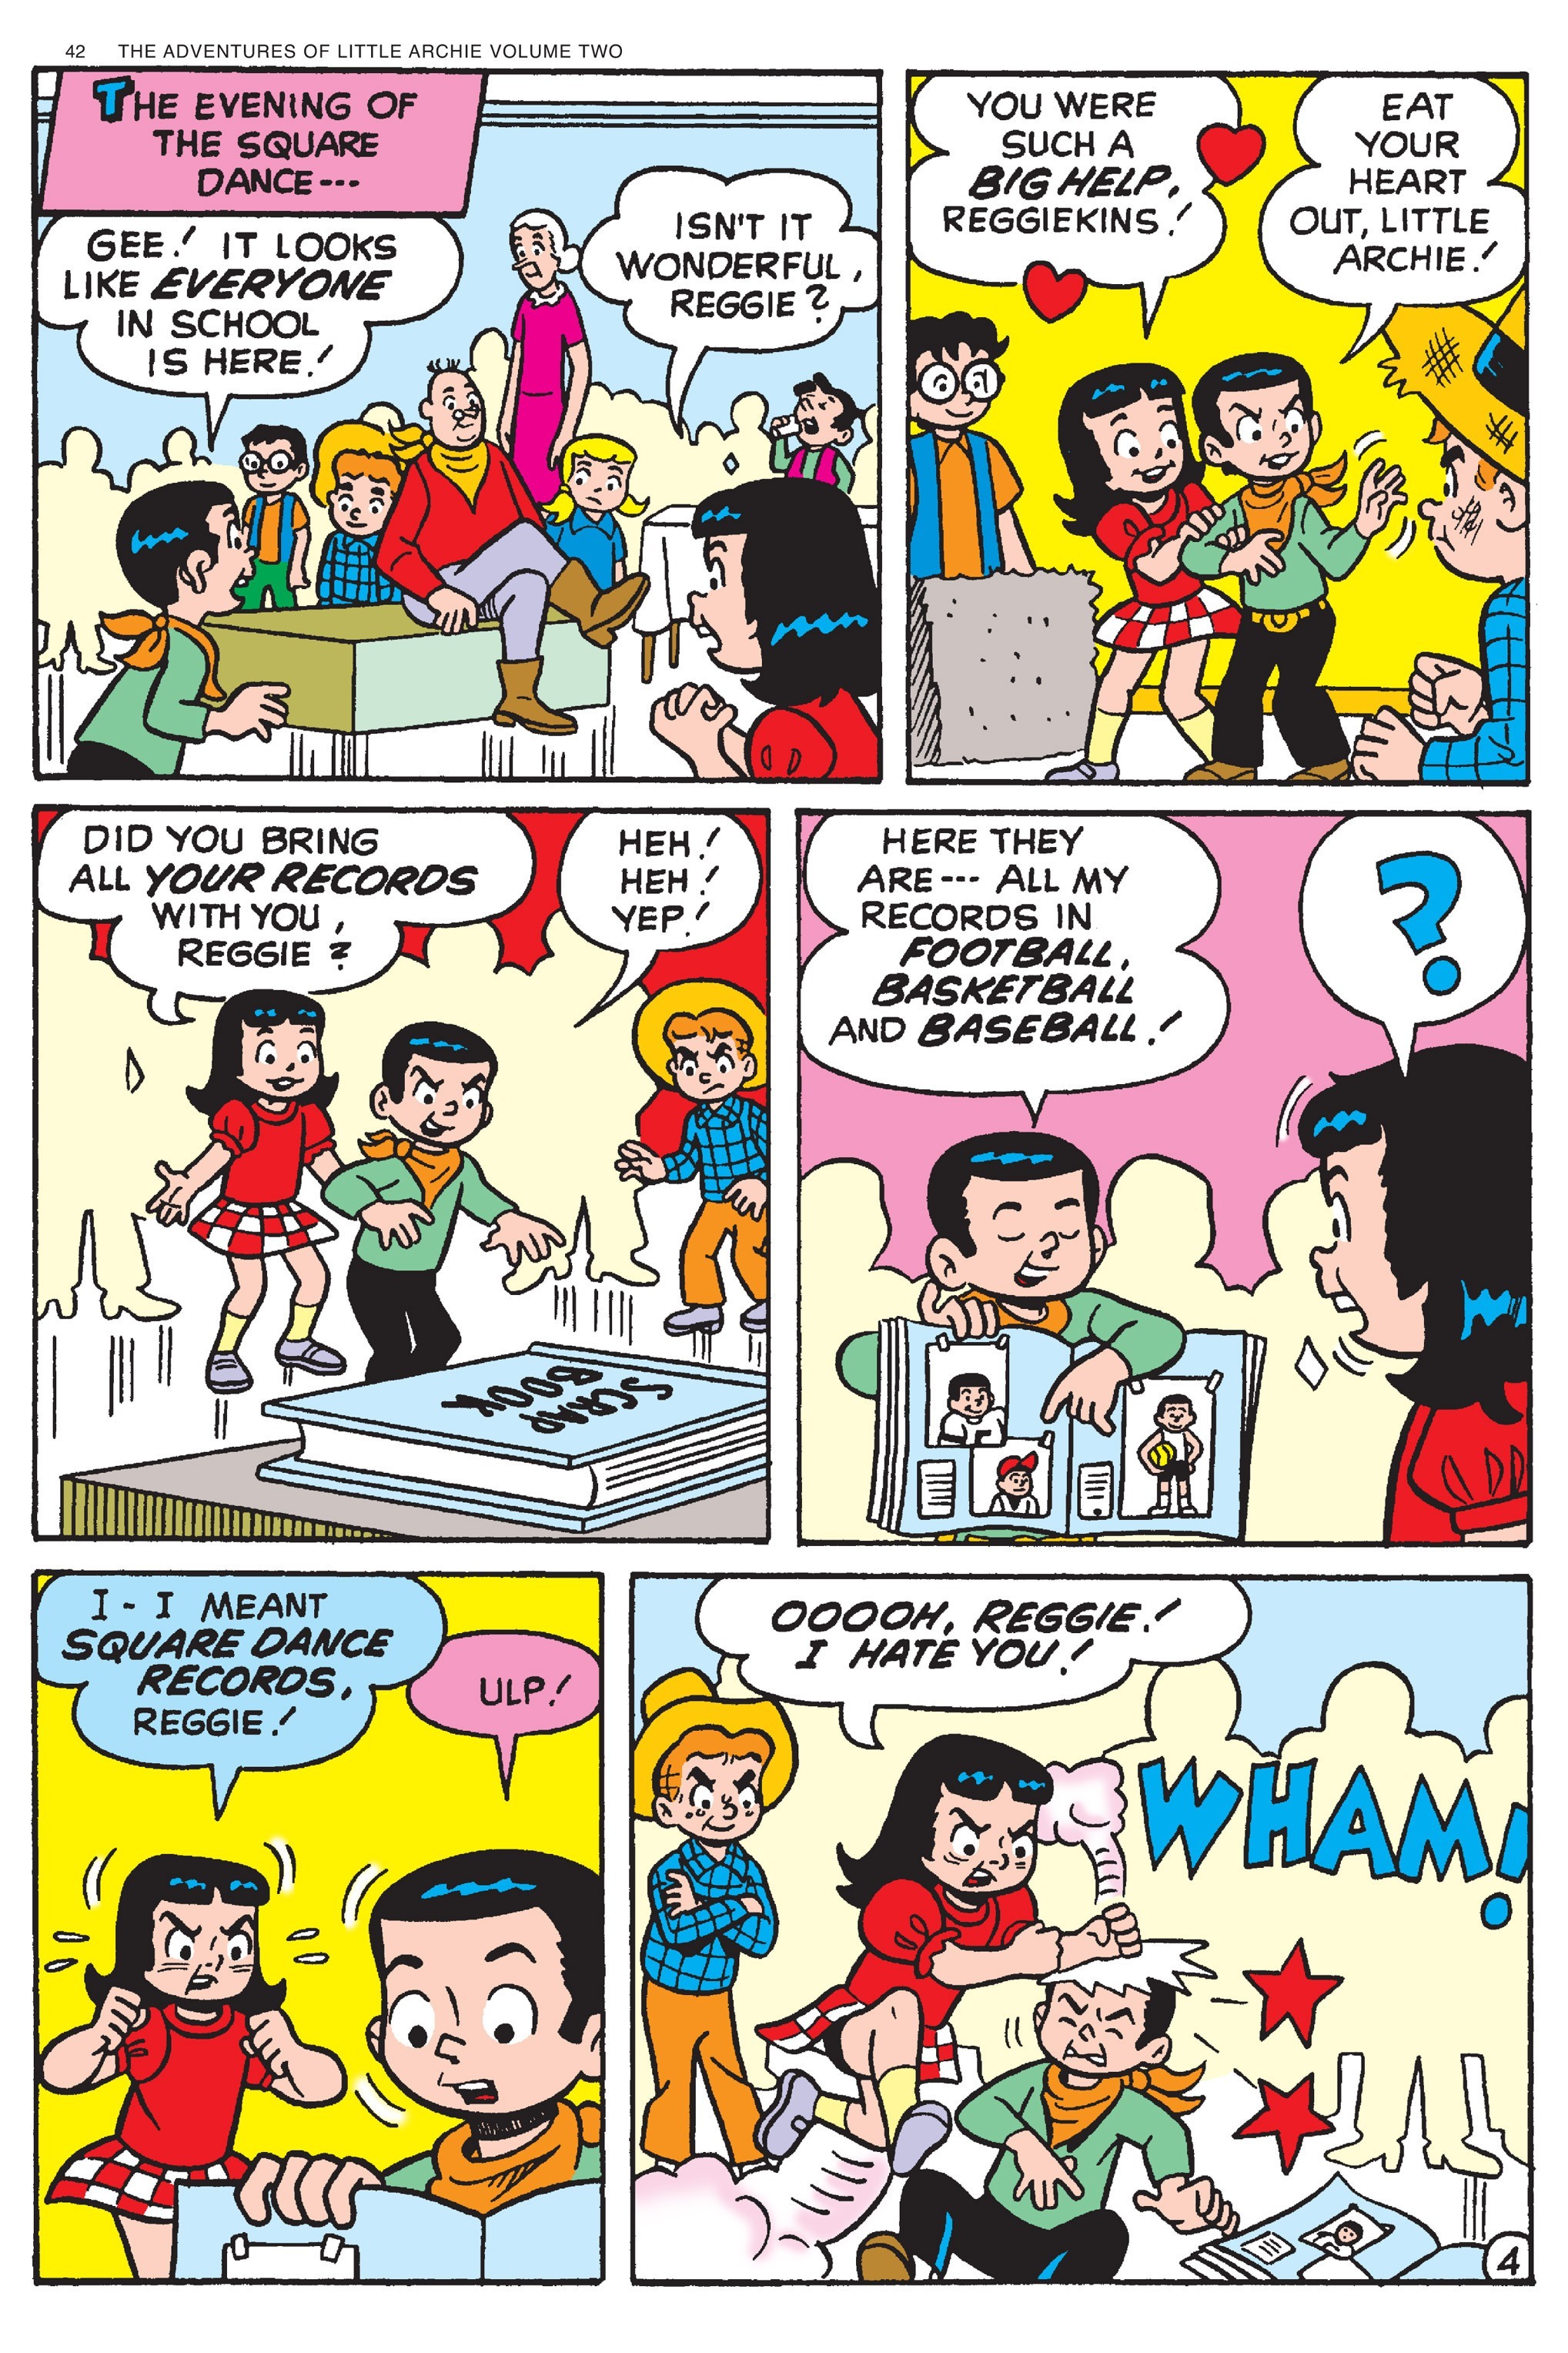 Read online Adventures of Little Archie comic -  Issue # TPB 2 - 43